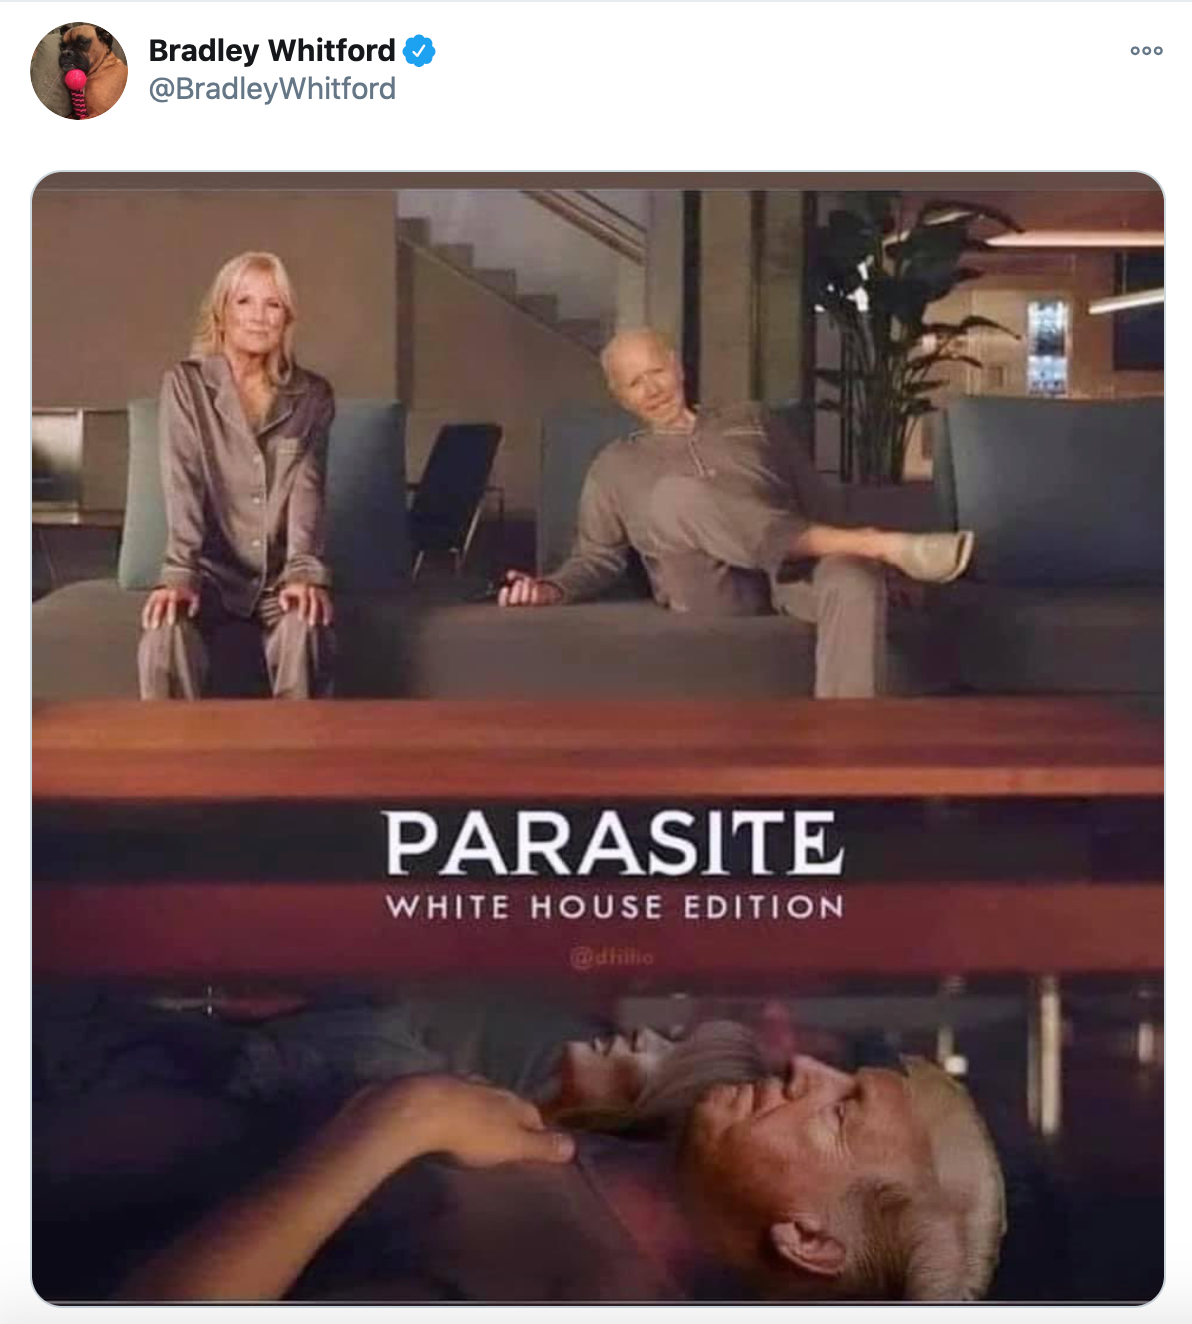 Bradley Whitford’s ‘Parasite’ meme, with the superimposed faces of the Bidens and the Trumps